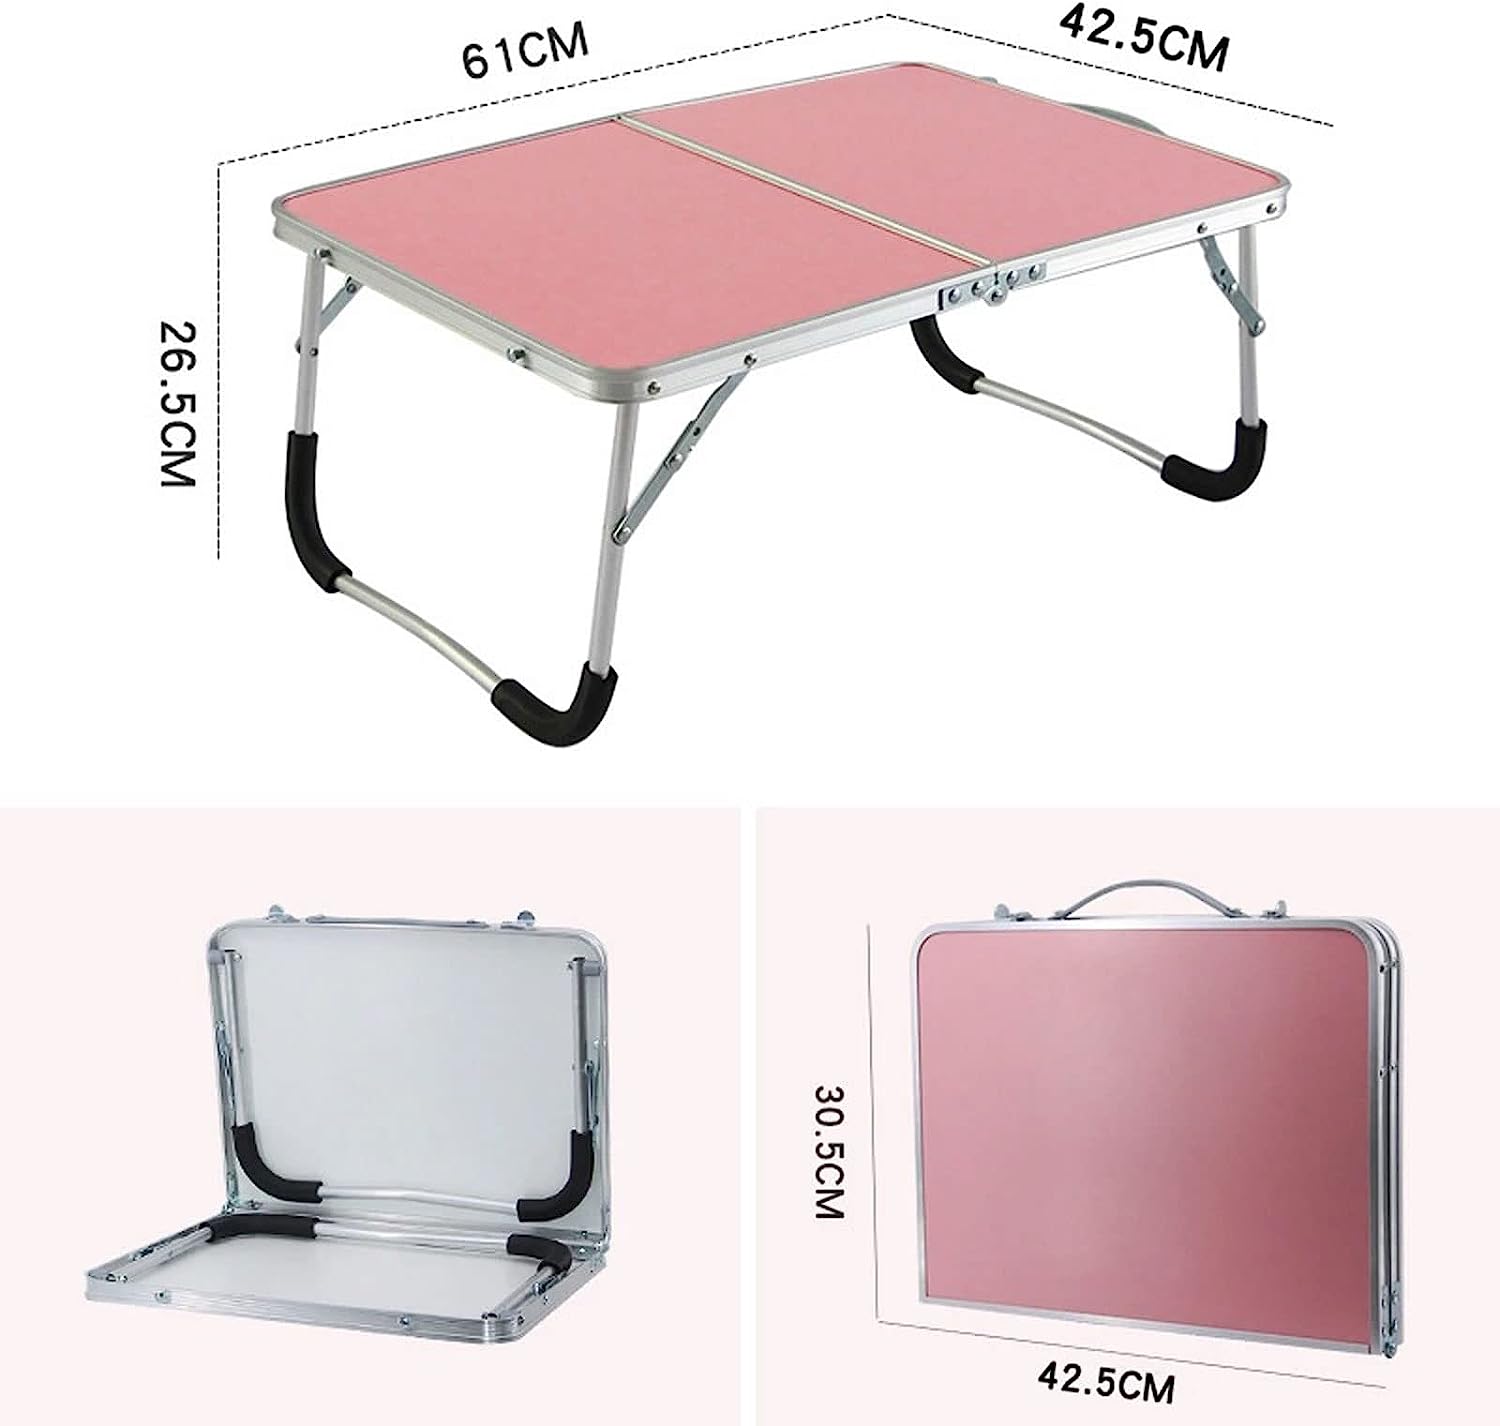 Portable Folding Mini Table with its size